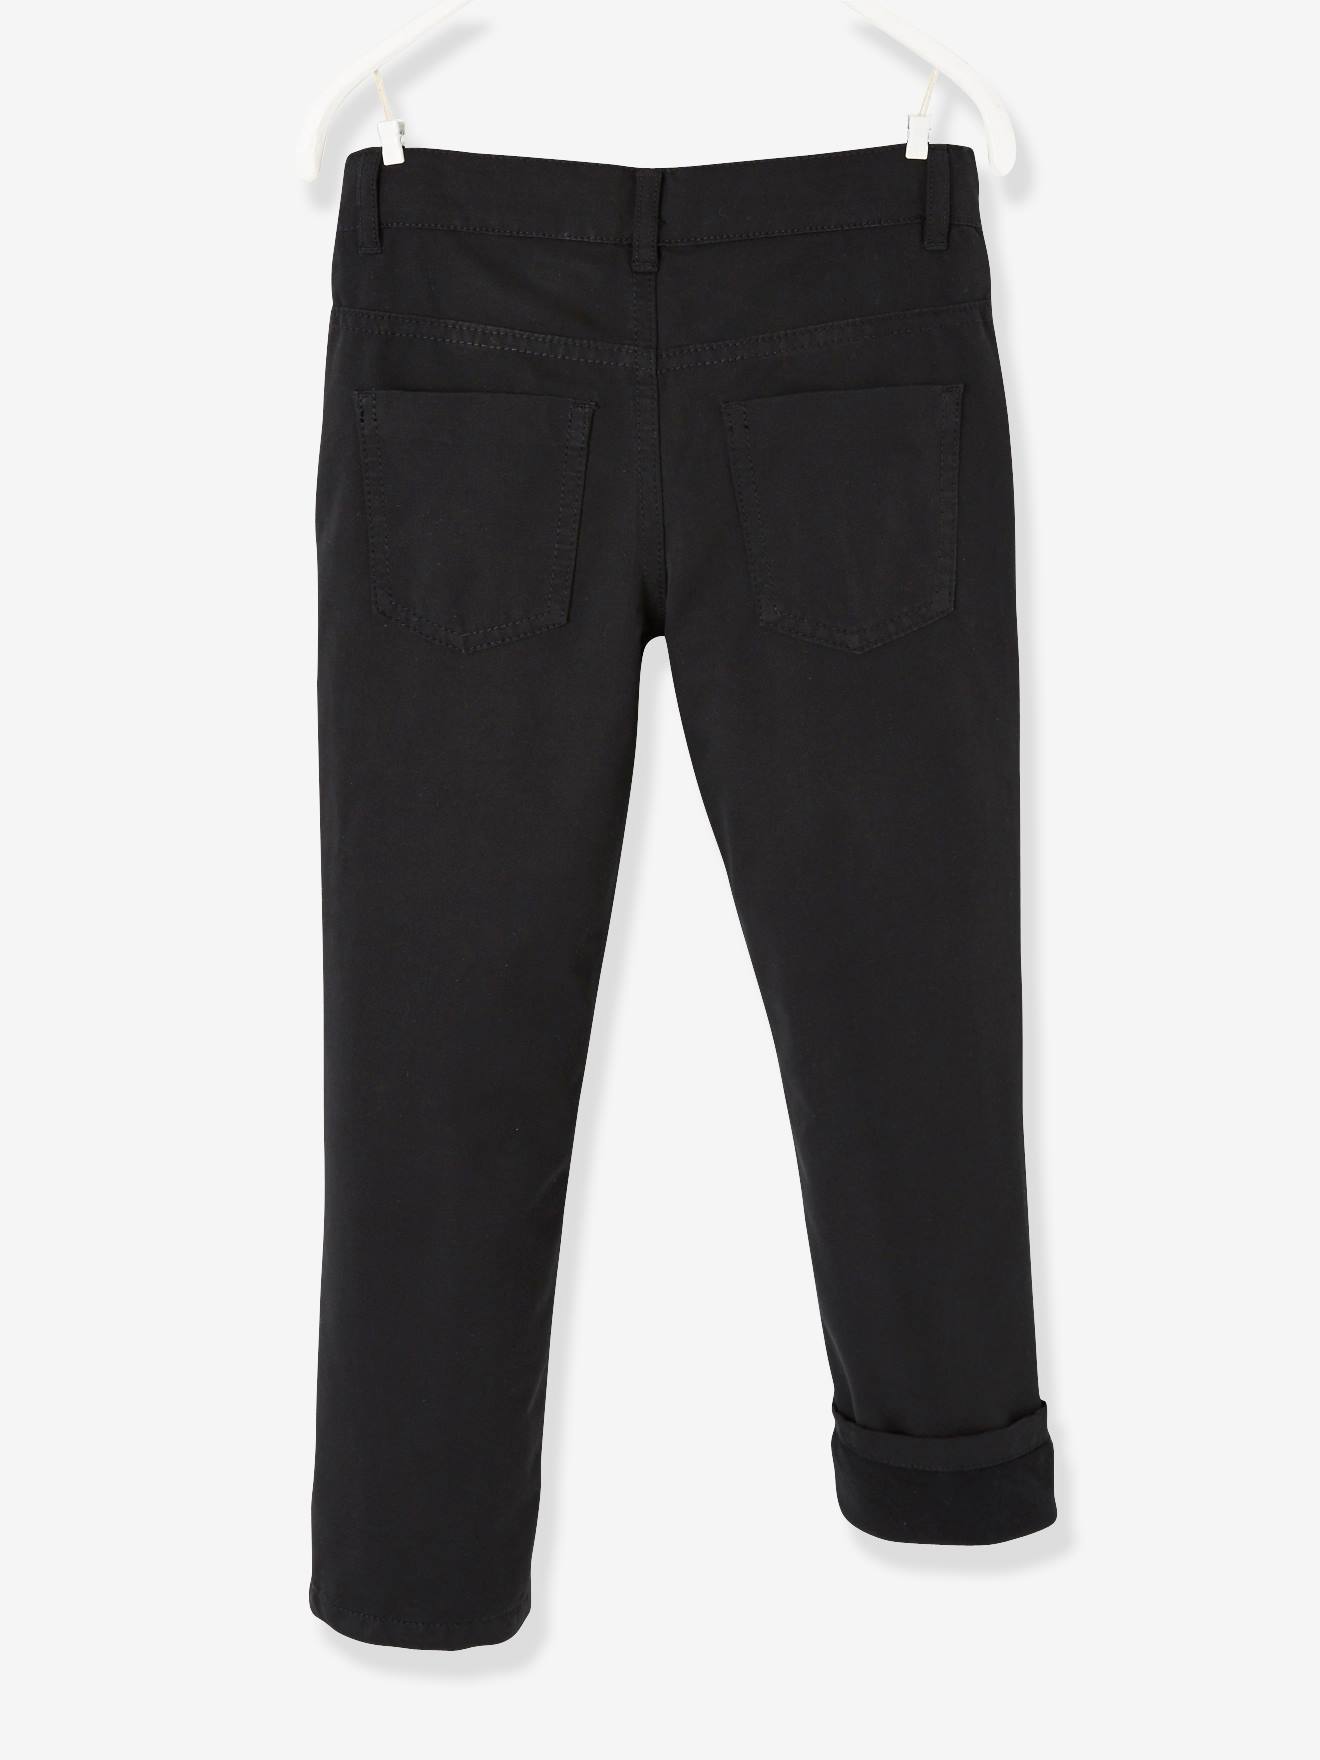 Youths 'ISCO' School Trousers - Super Skinny - Black